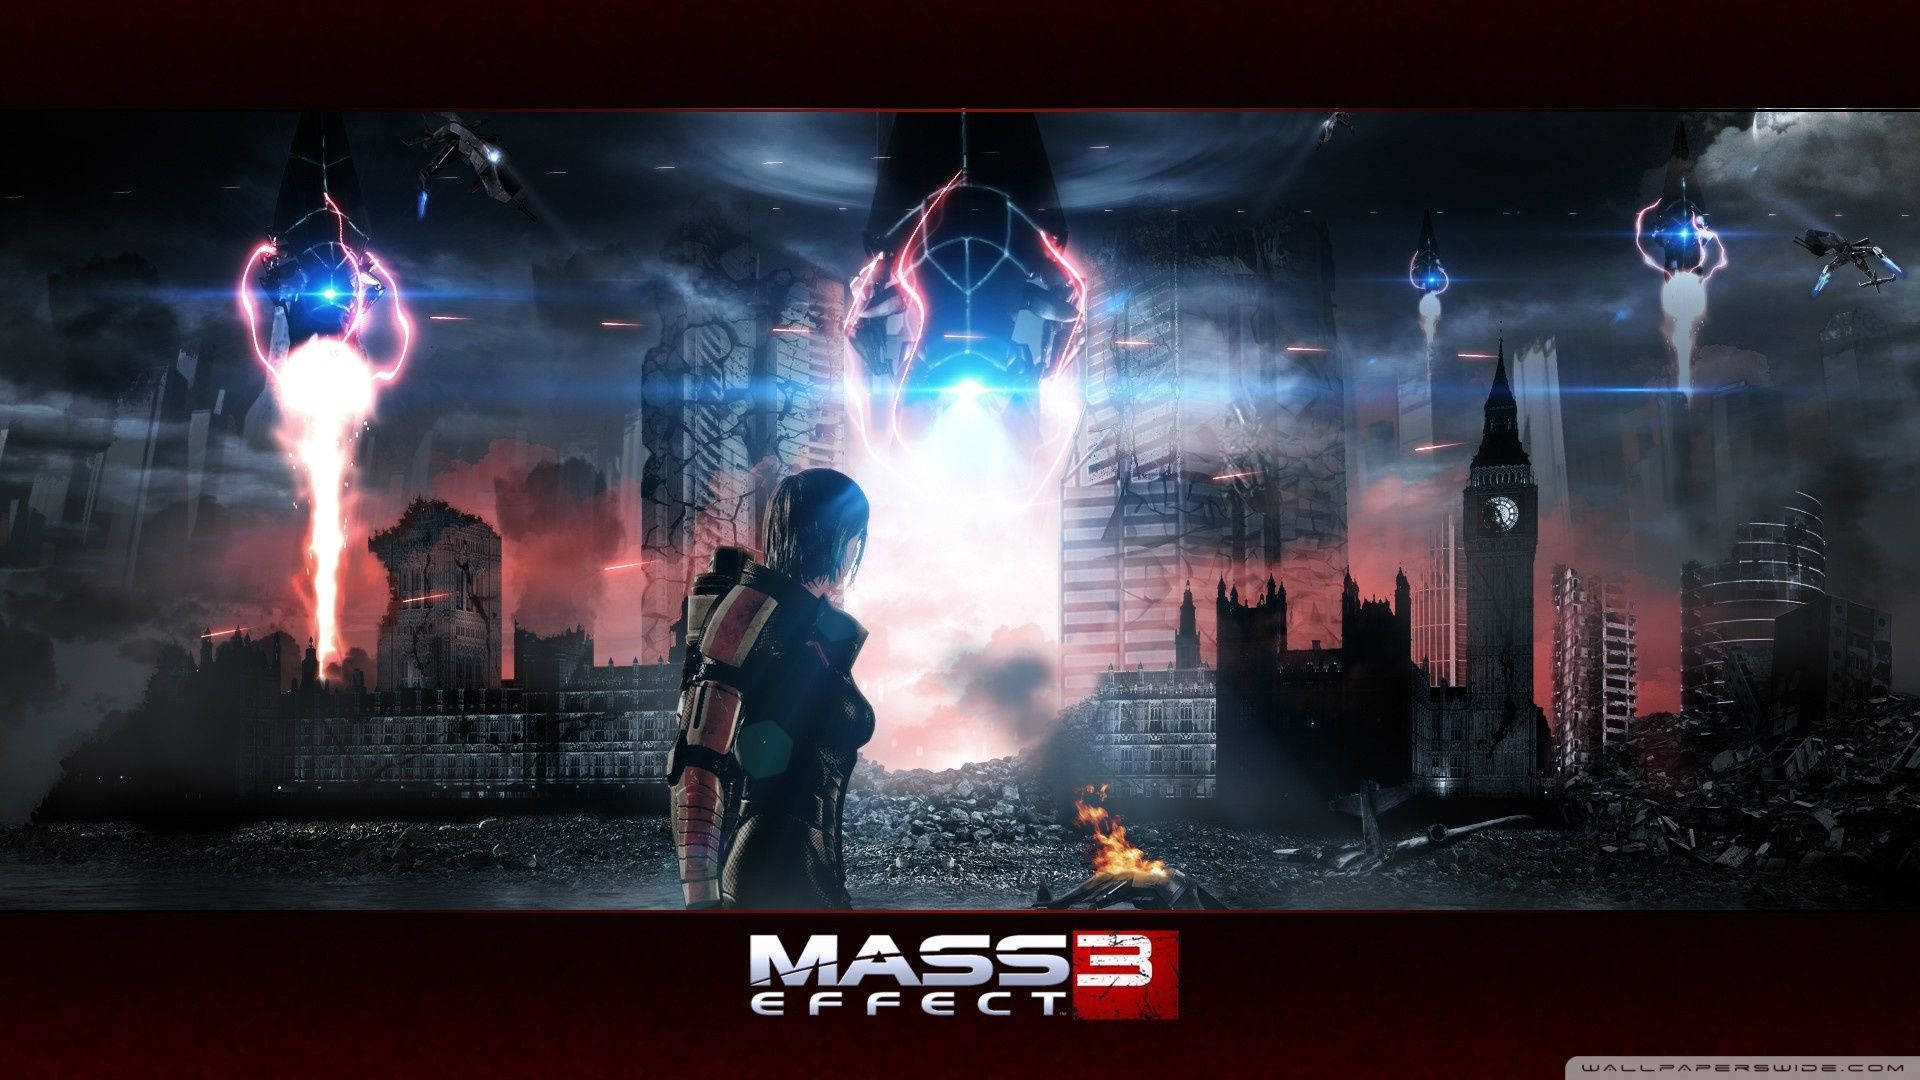 Mass Effect 3 Destroyed Buildings